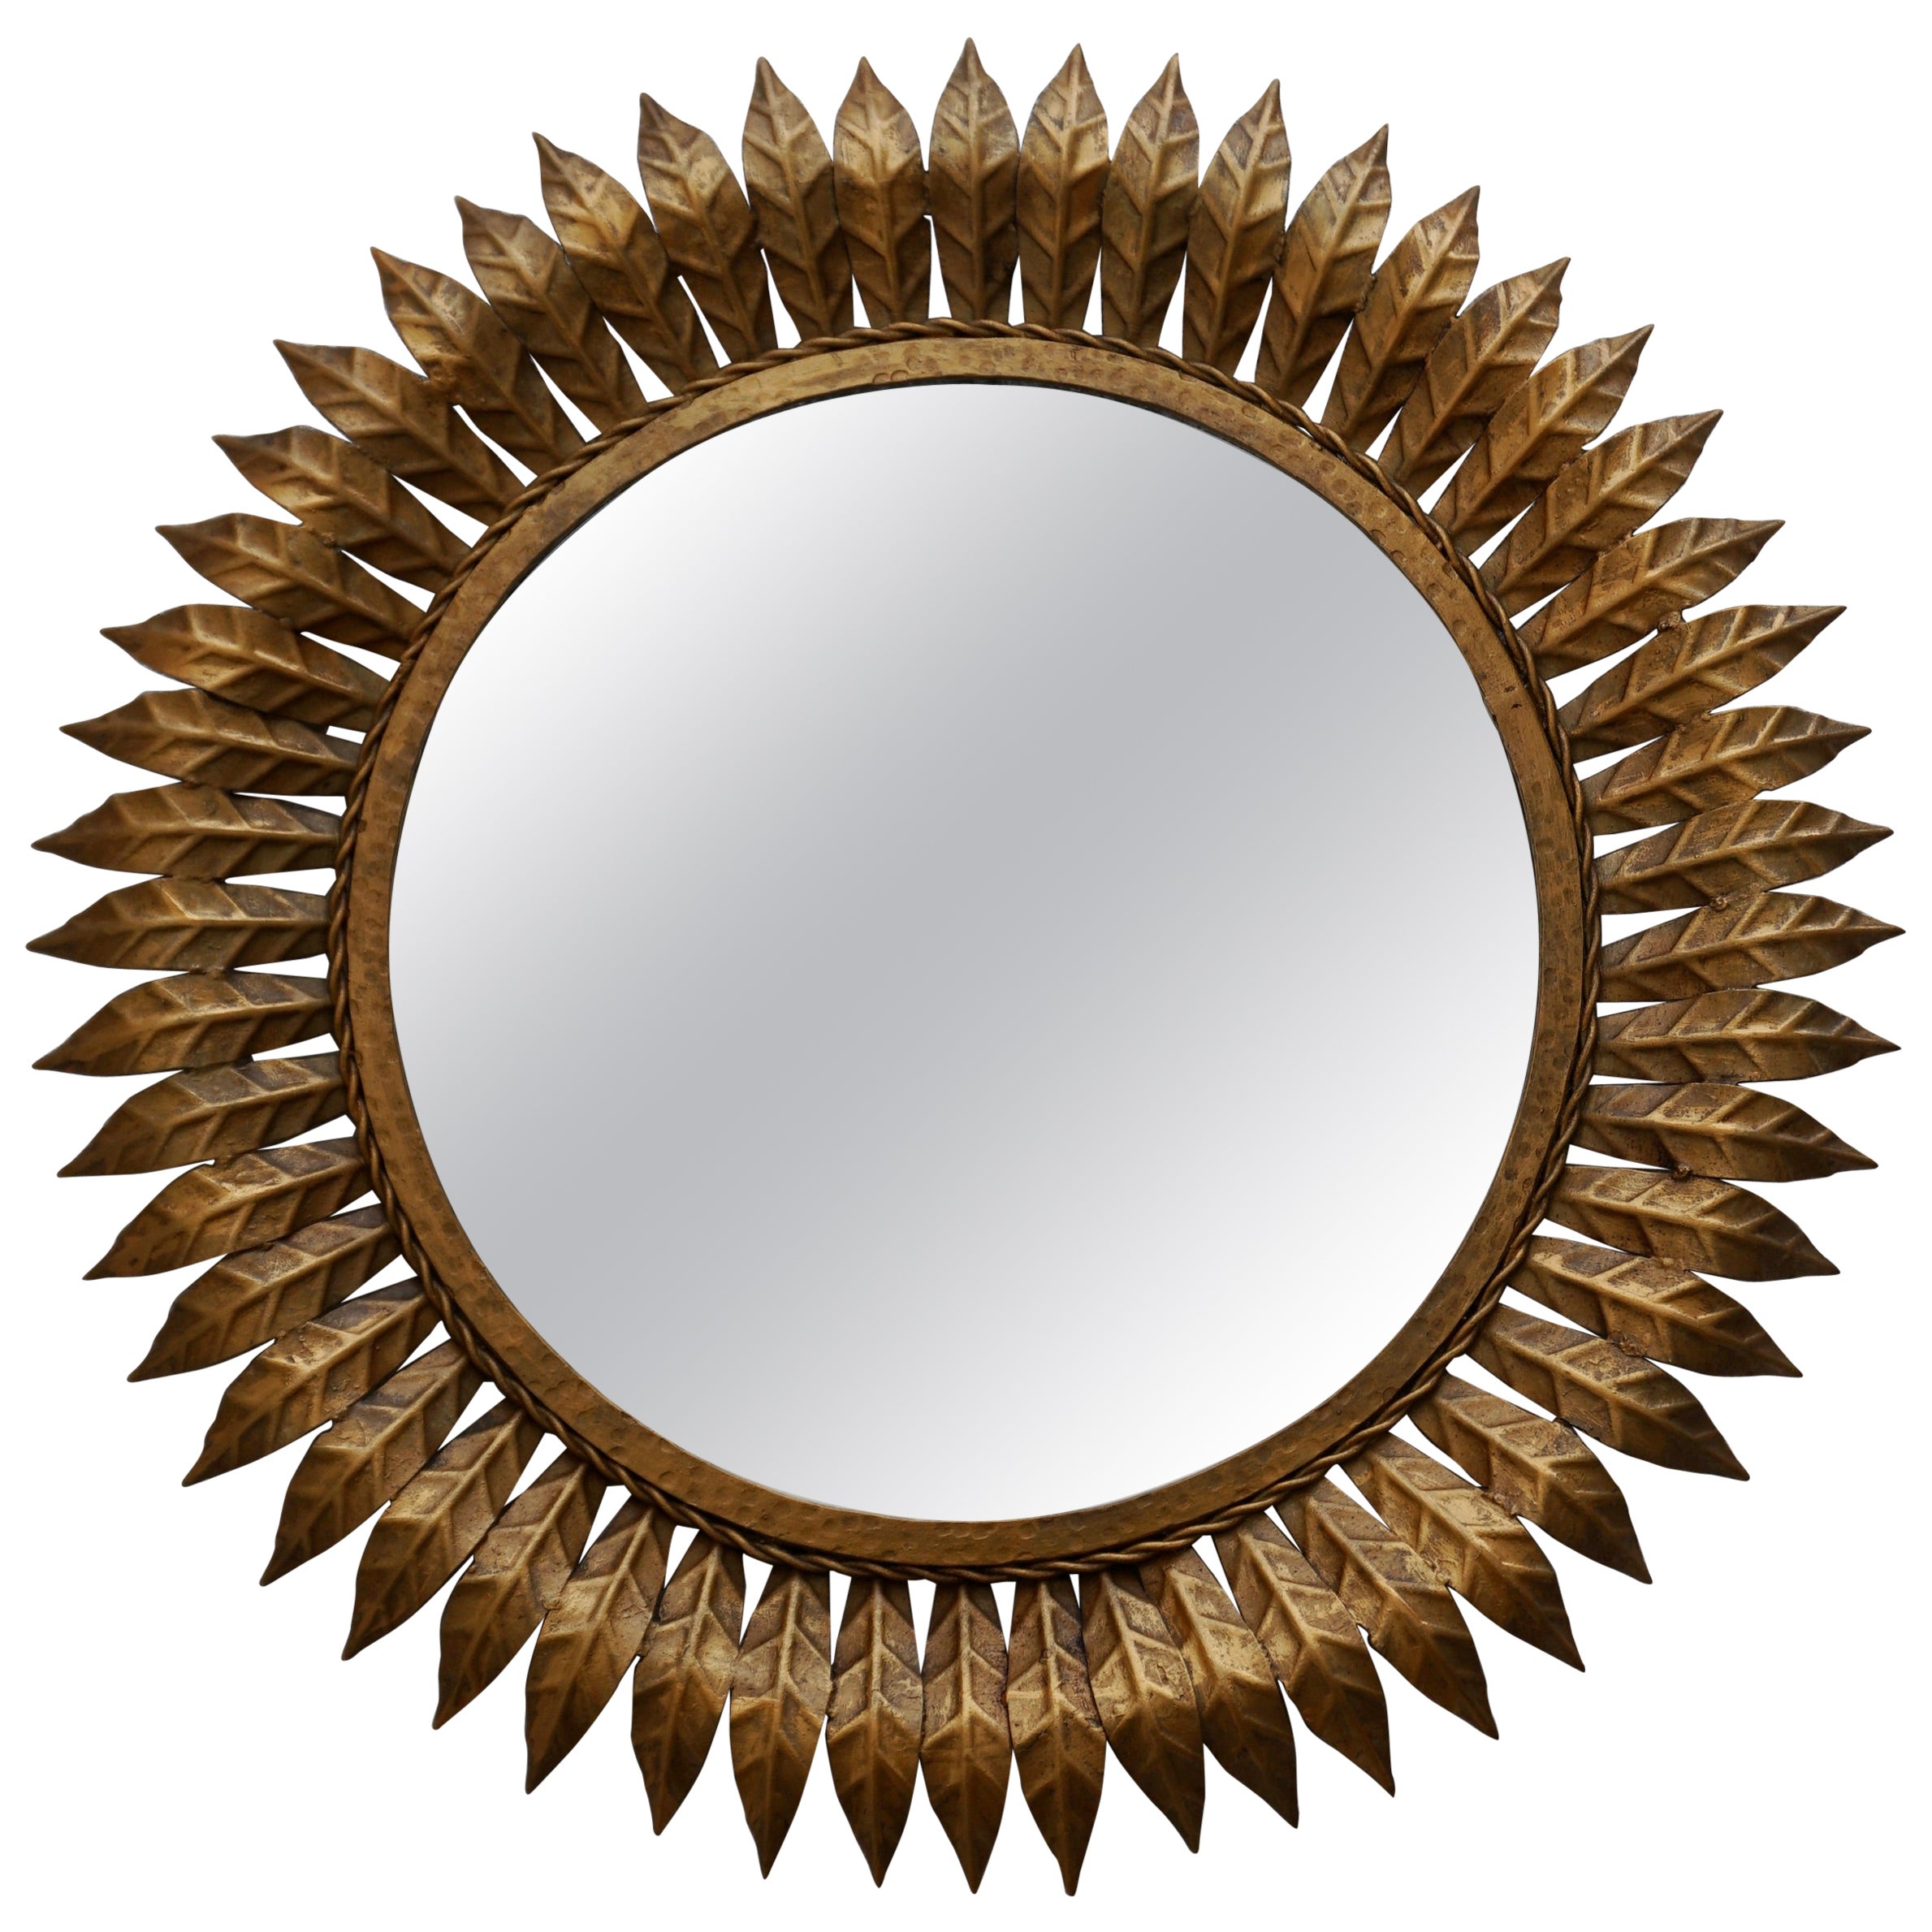 Sunburst Mirror, Framed with Gold-colored Metal Leaves, Italy 1970 For Sale